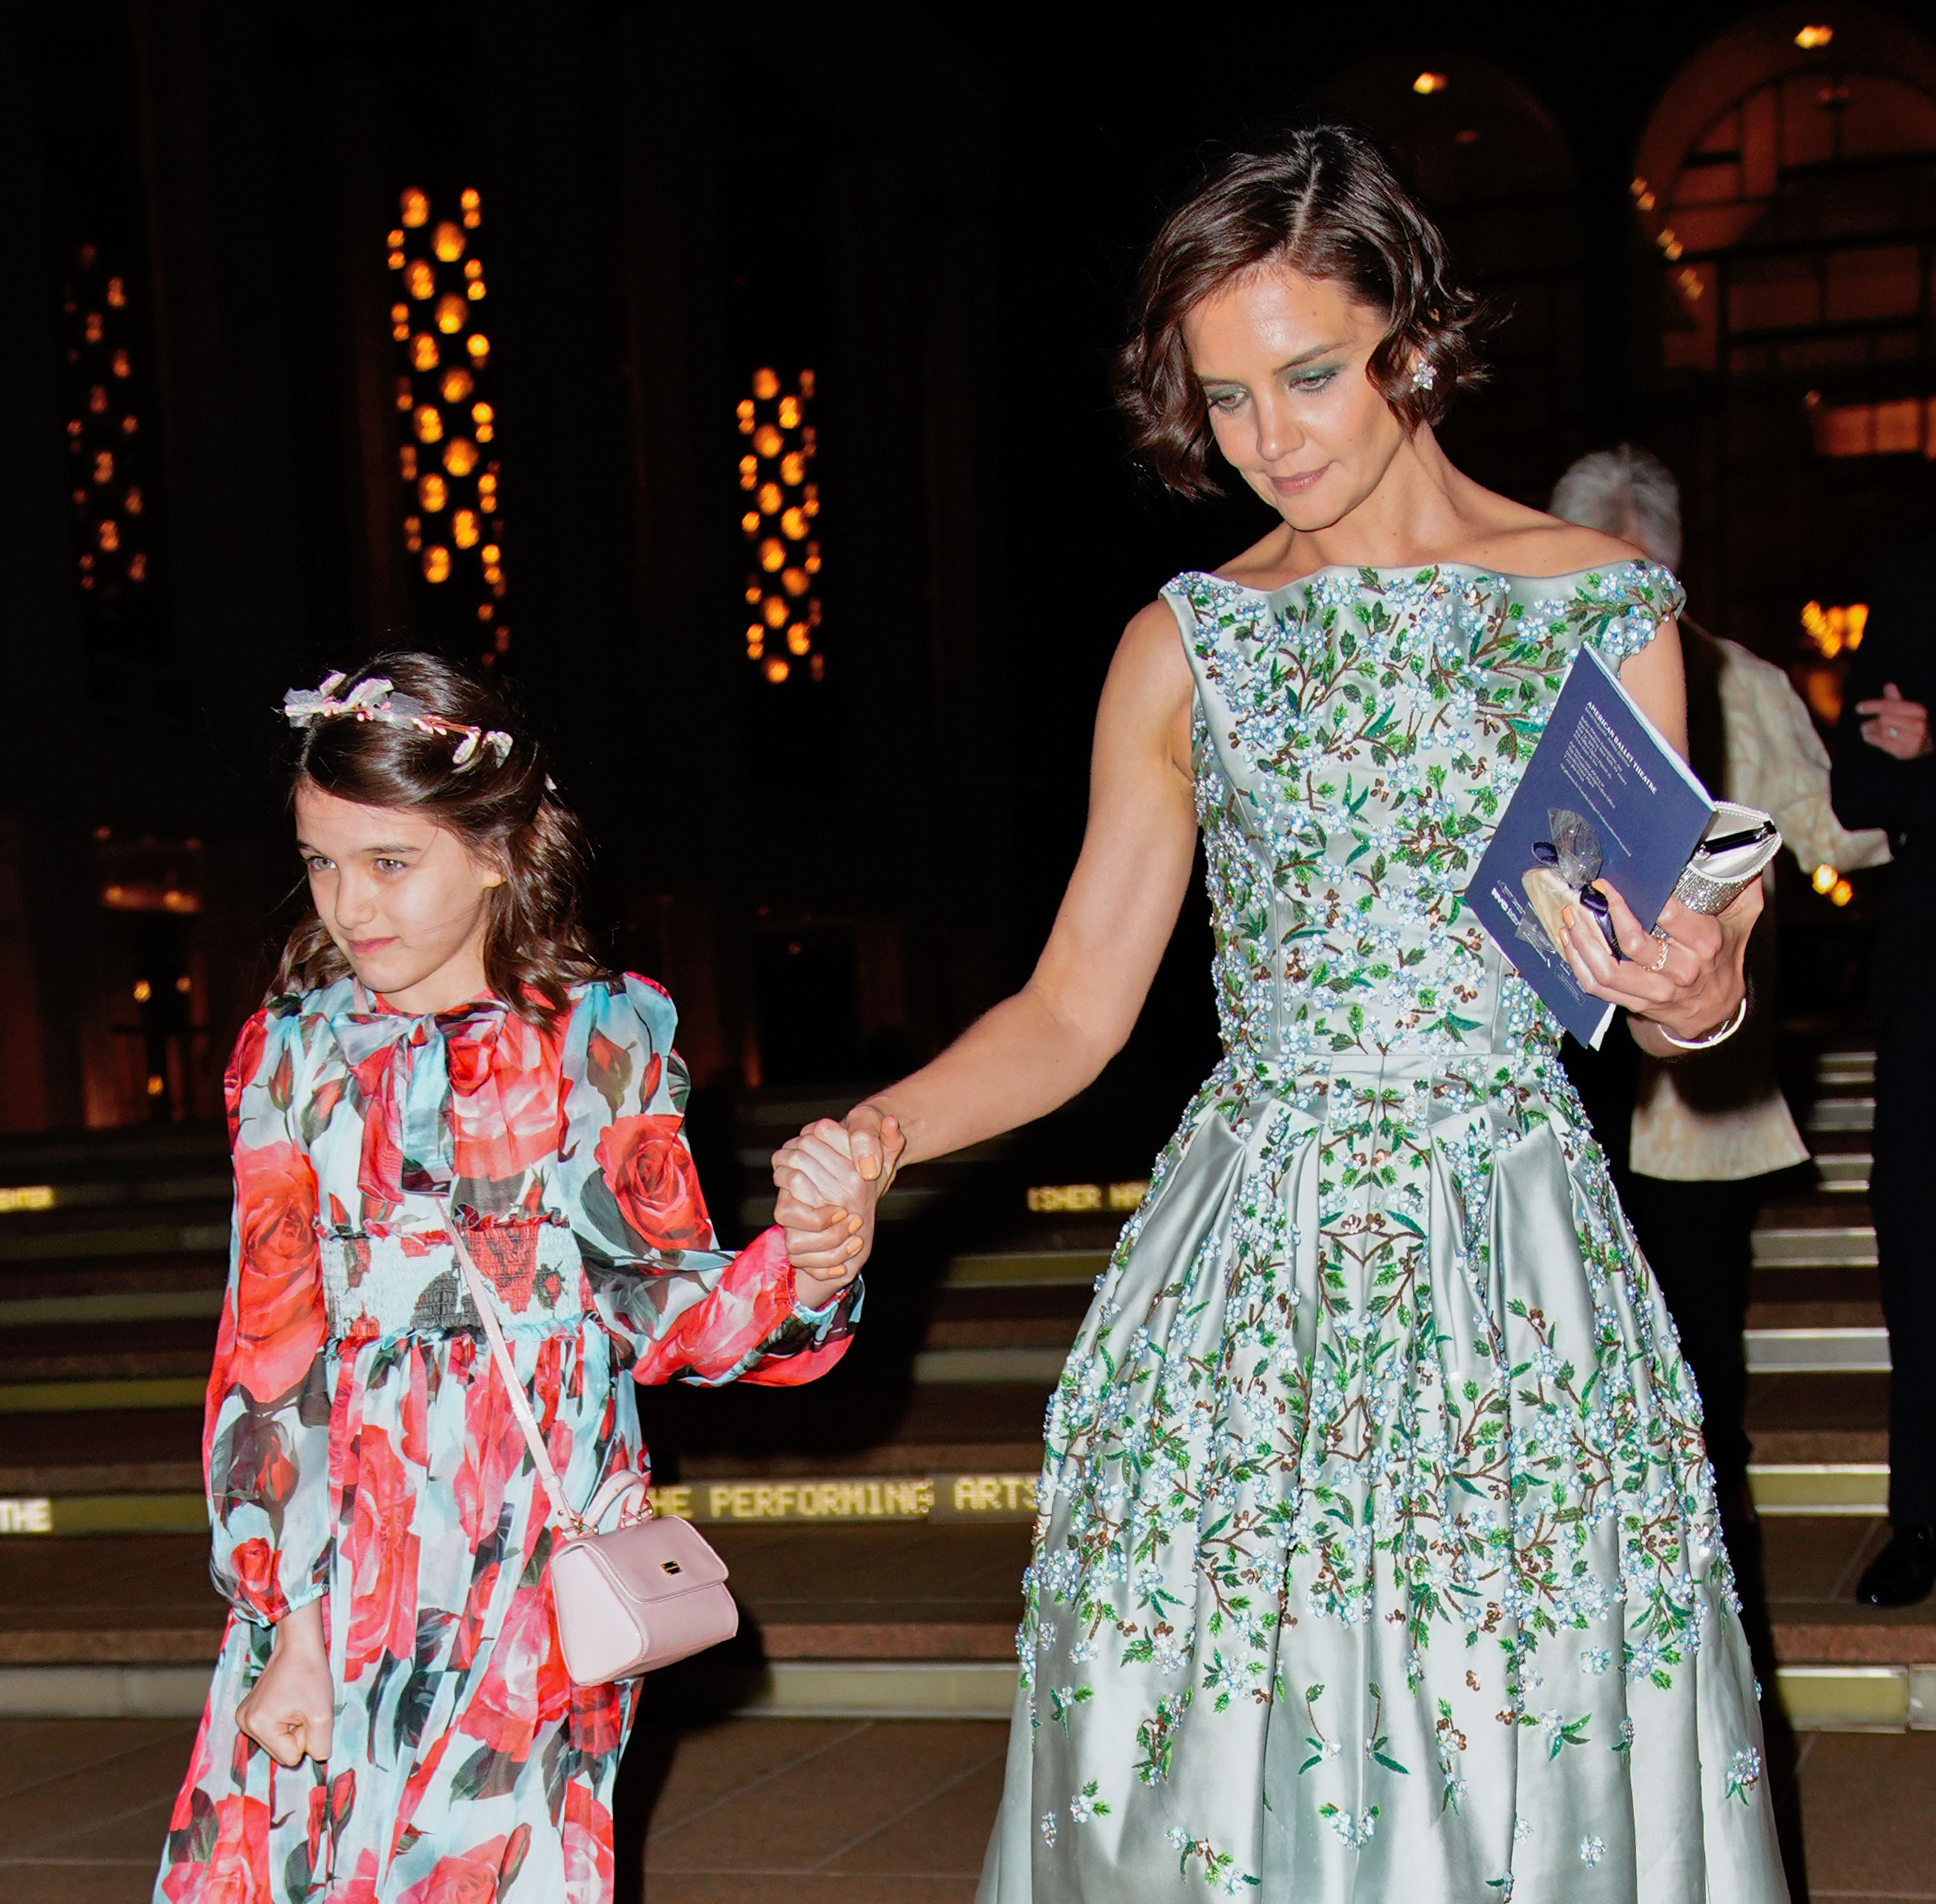 Katie Holmes and Suri Cruise enjoy a night at American Ballet Theater in New York City on May 21, 2018. | Source: Getty Images